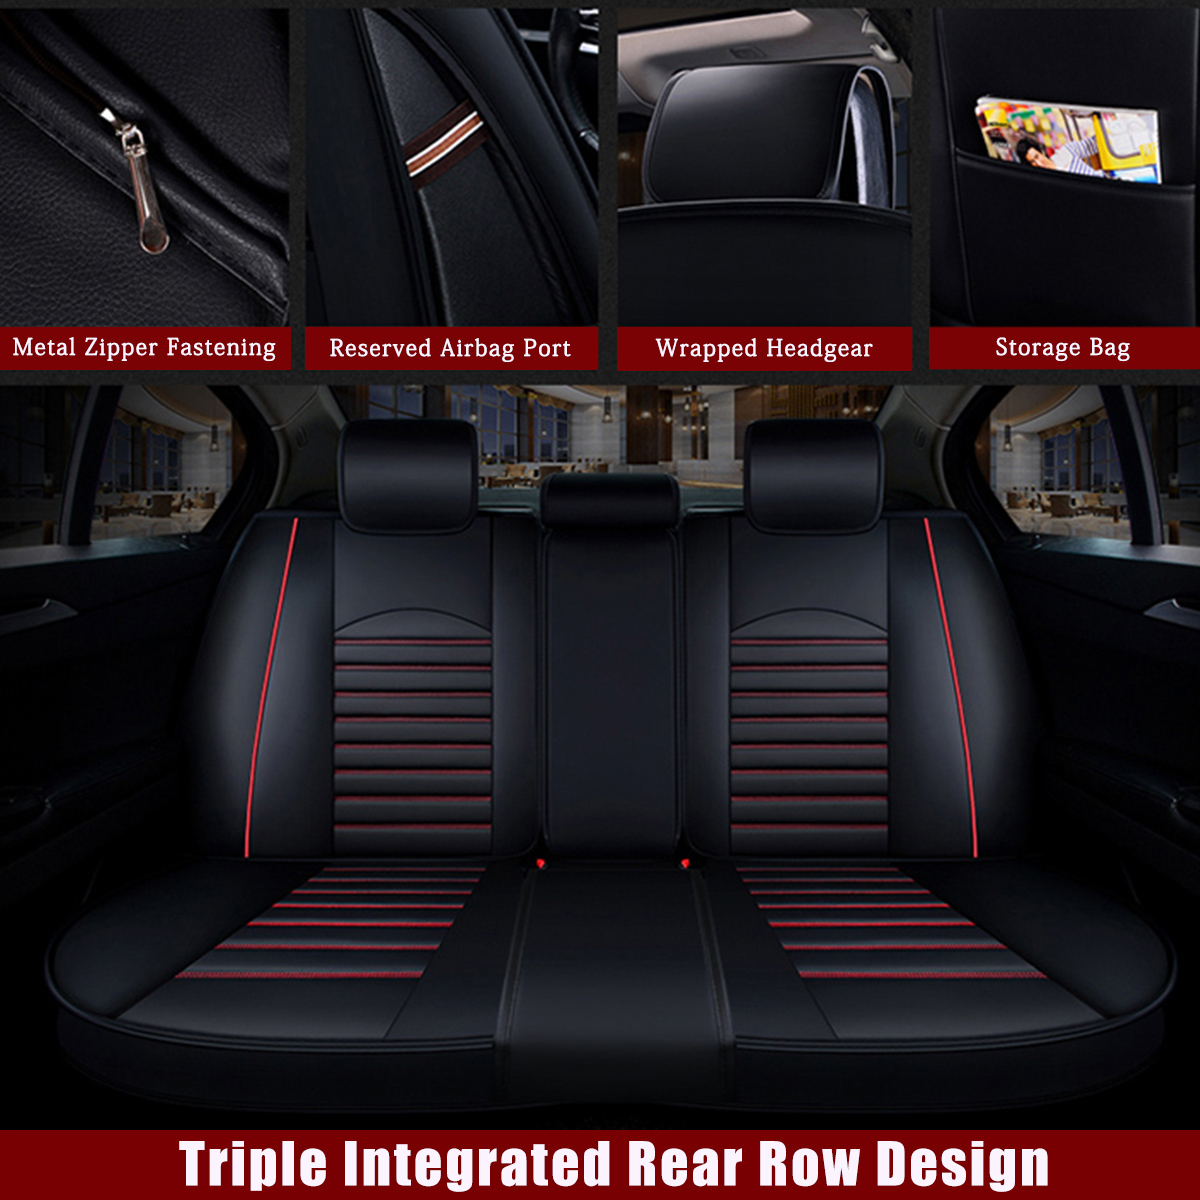 Universal-Wear-Resistant-Front--Rear-PU-Leather-Semi-Enclosed-Car-Seat-Cover-Set-1823458-2